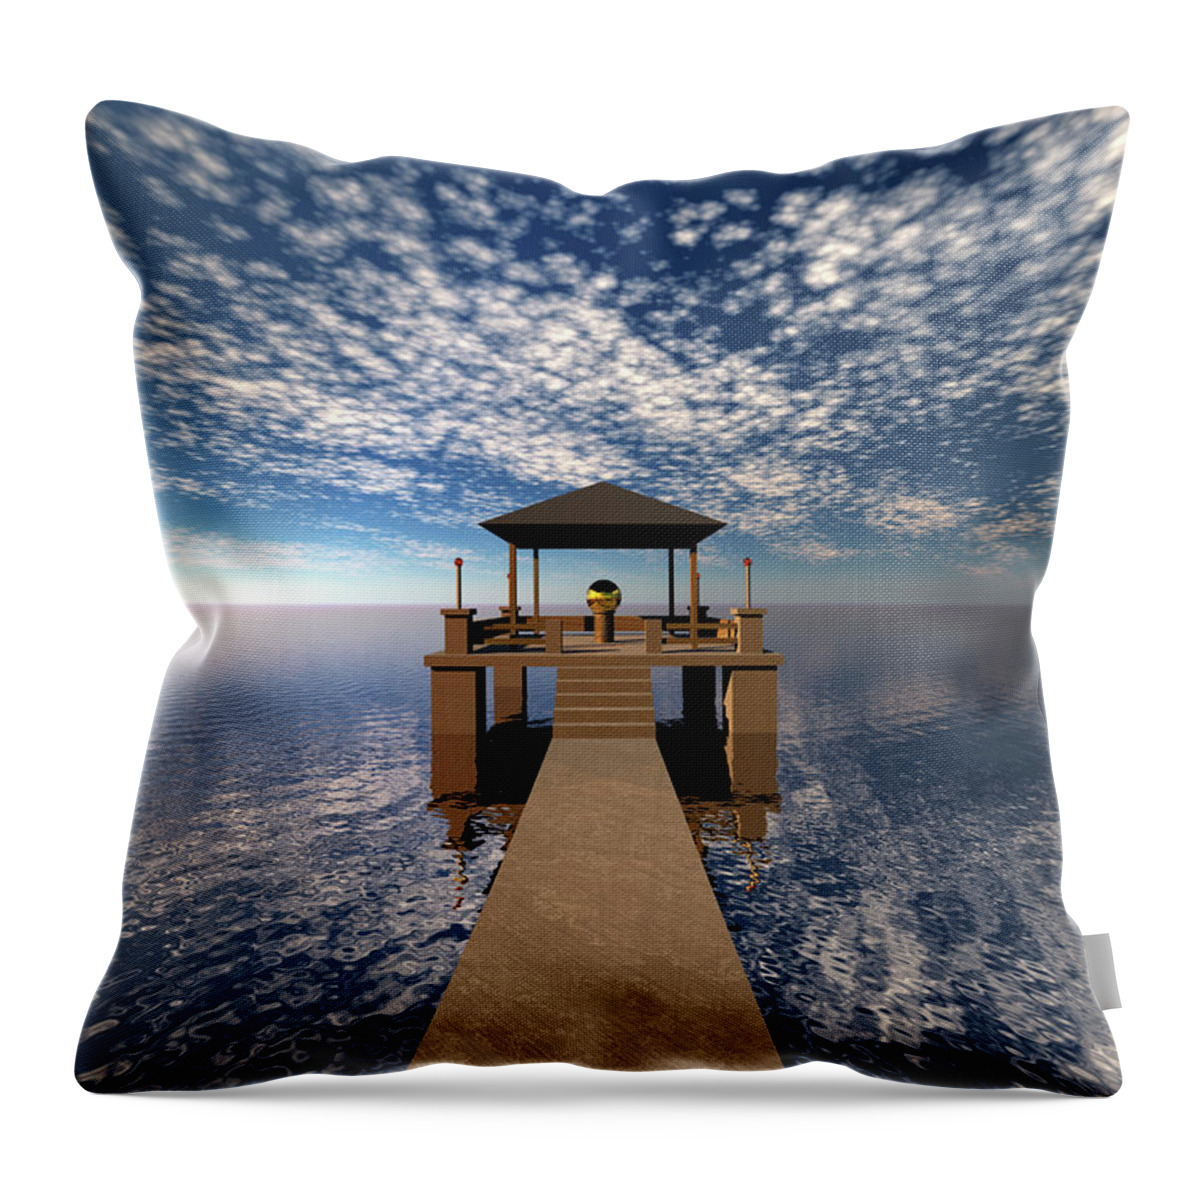 Vacation Throw Pillow featuring the digital art Seaside Villa by Phil Perkins